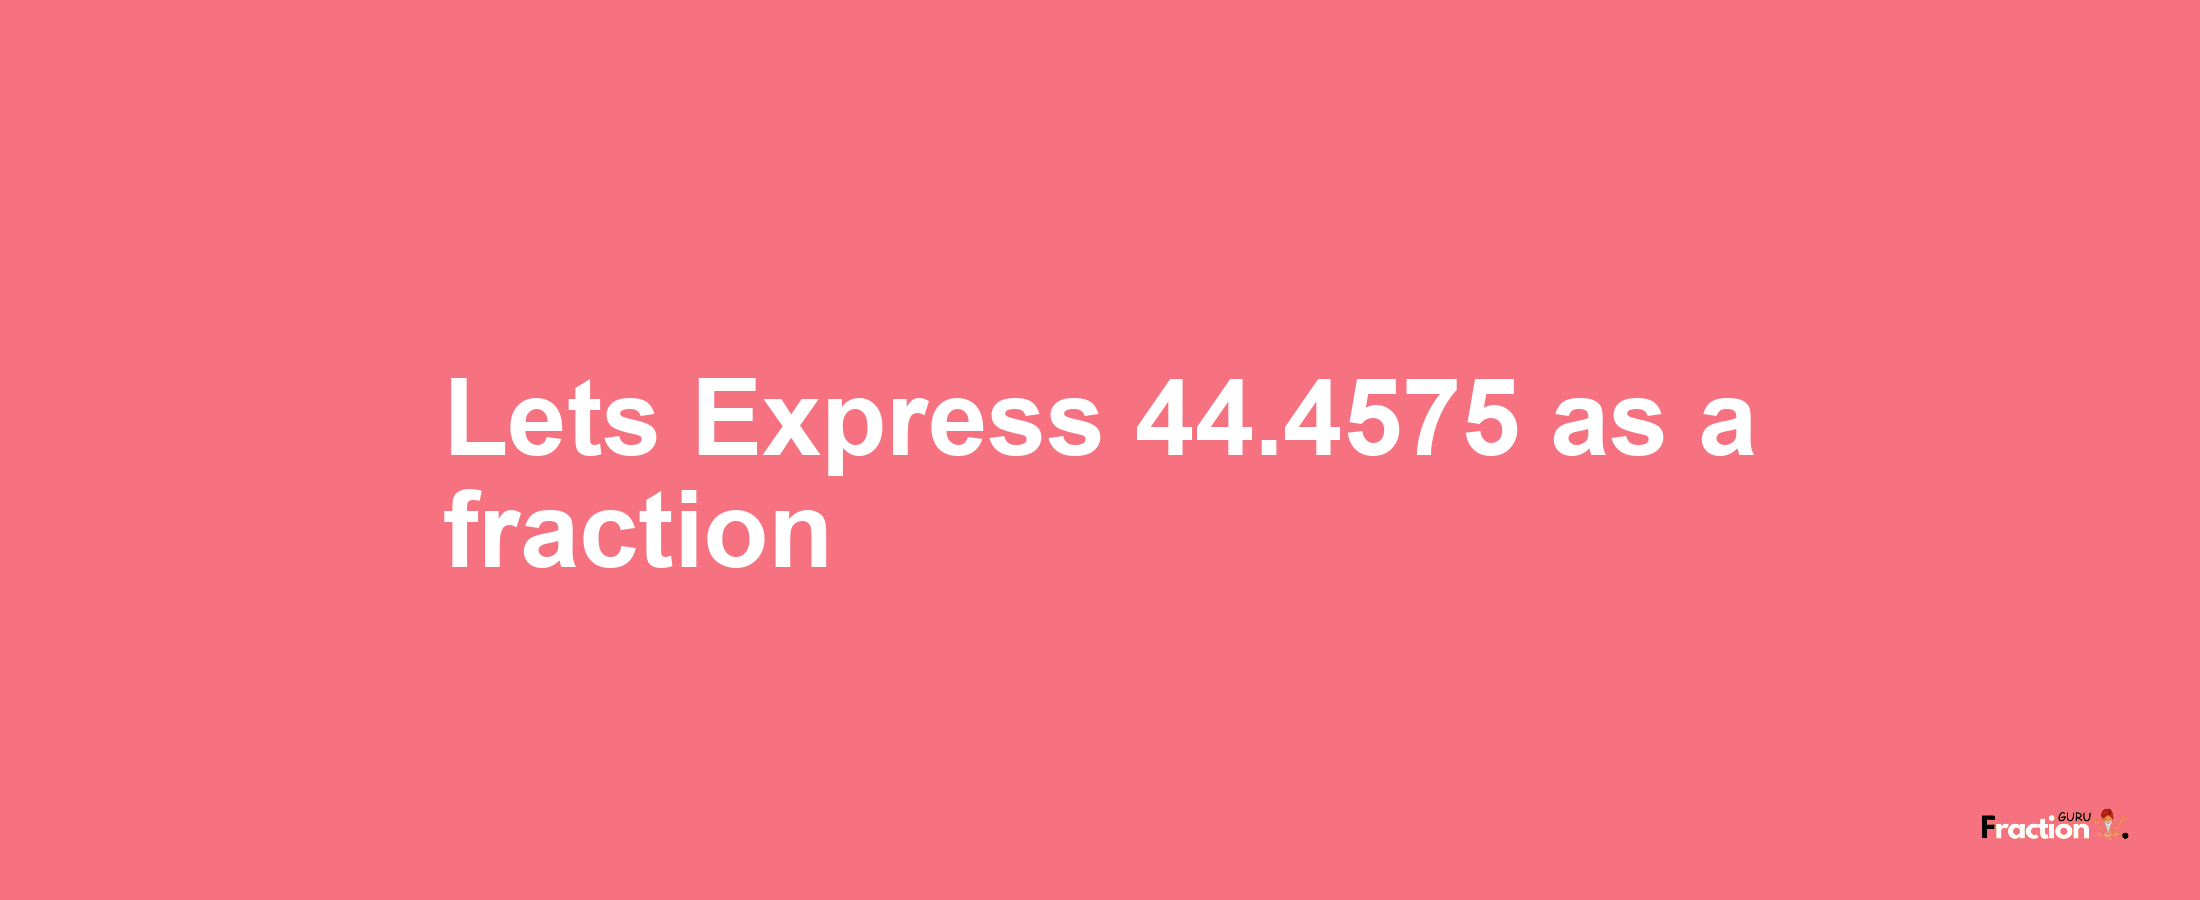 Lets Express 44.4575 as afraction